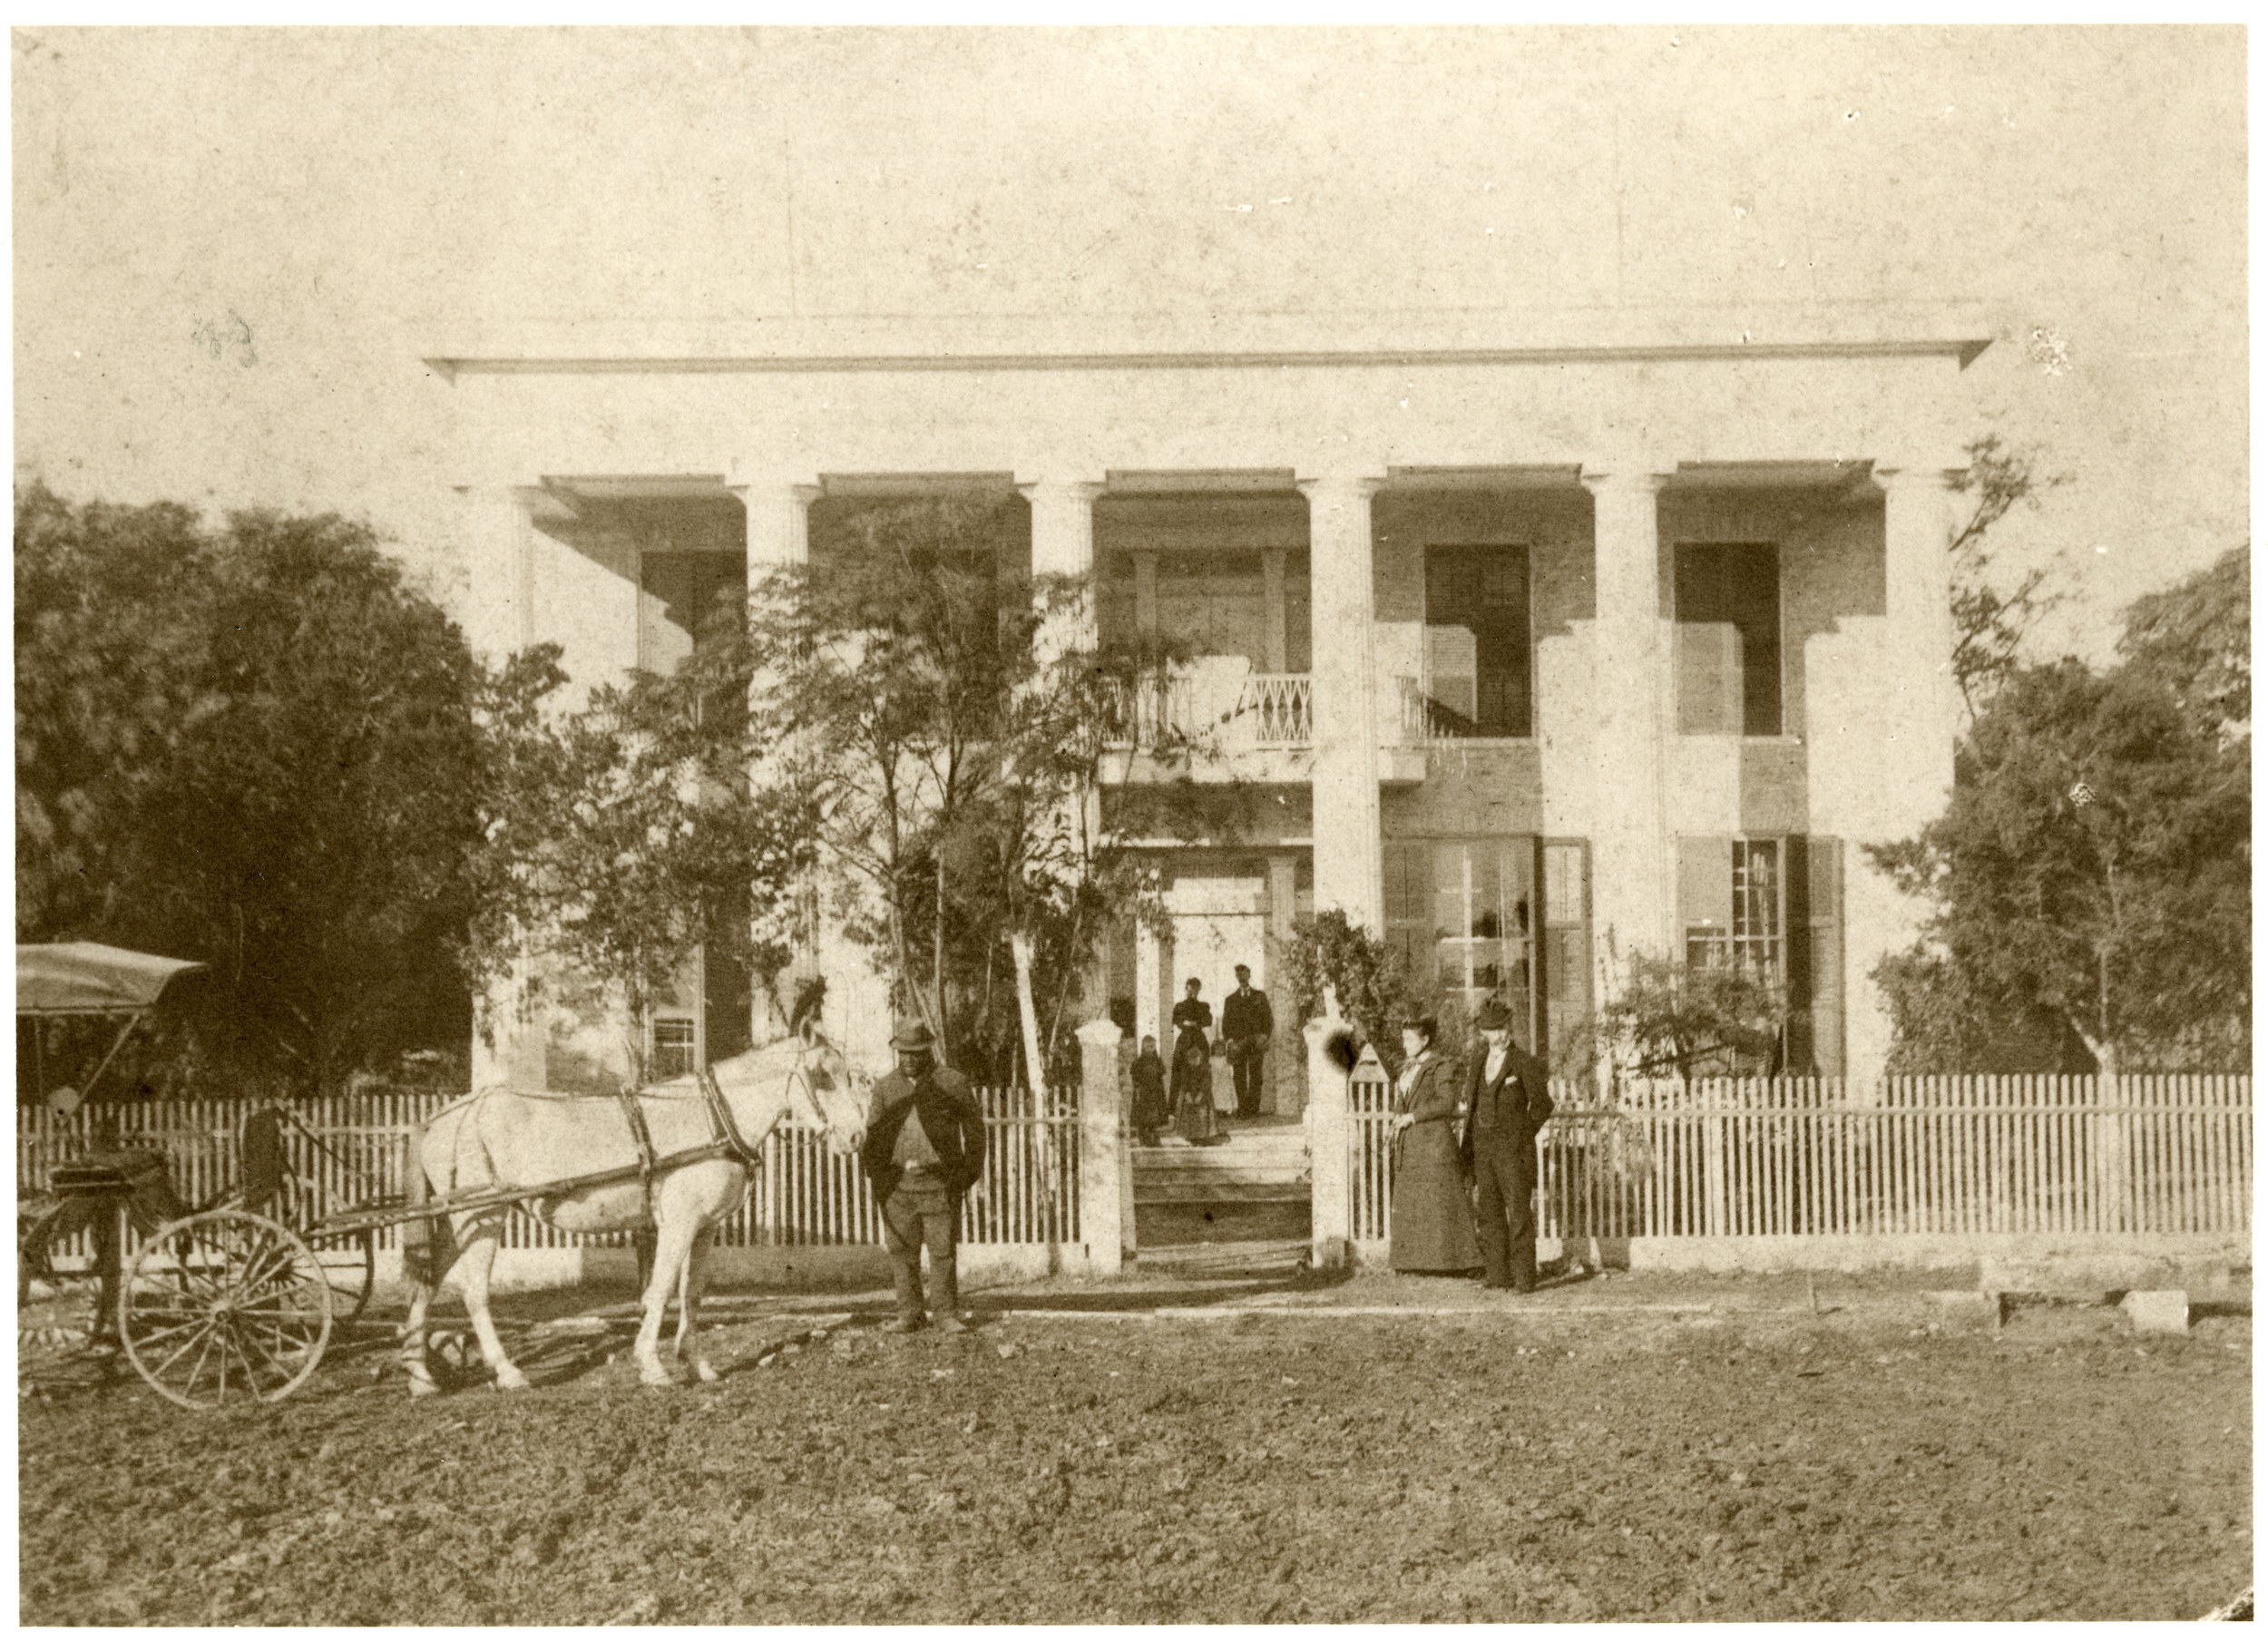  This photograph was taken c. 1893, soon after the Cochran family moved in to the house. The tree behind the coachman is the Pecan as a young tree. 